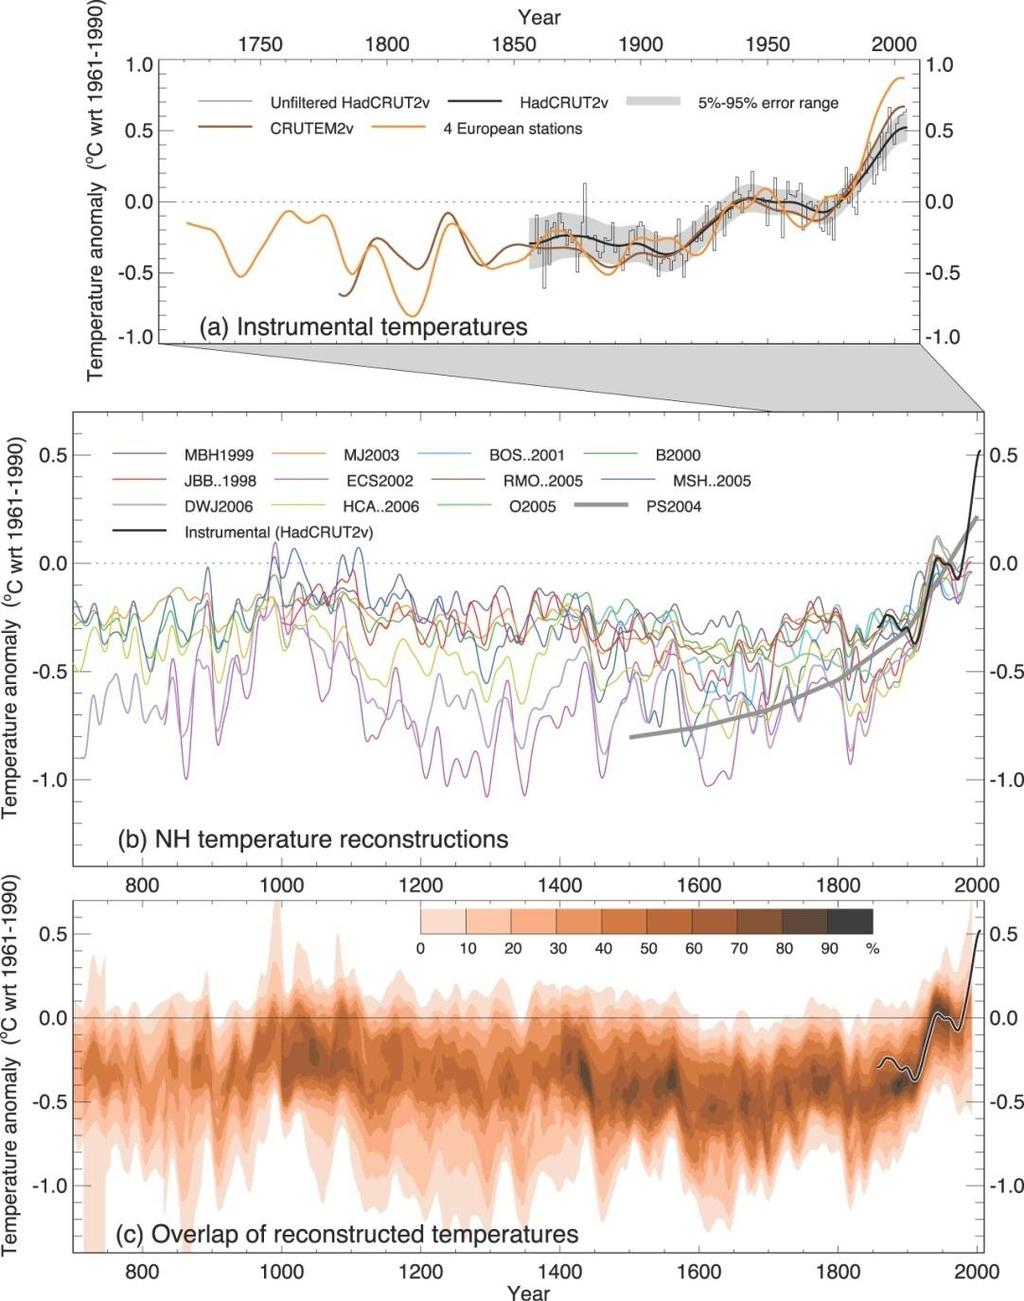 Changes over the past 1300 years Records of Northern Hemisphere temperature variations over the last 1300 years.